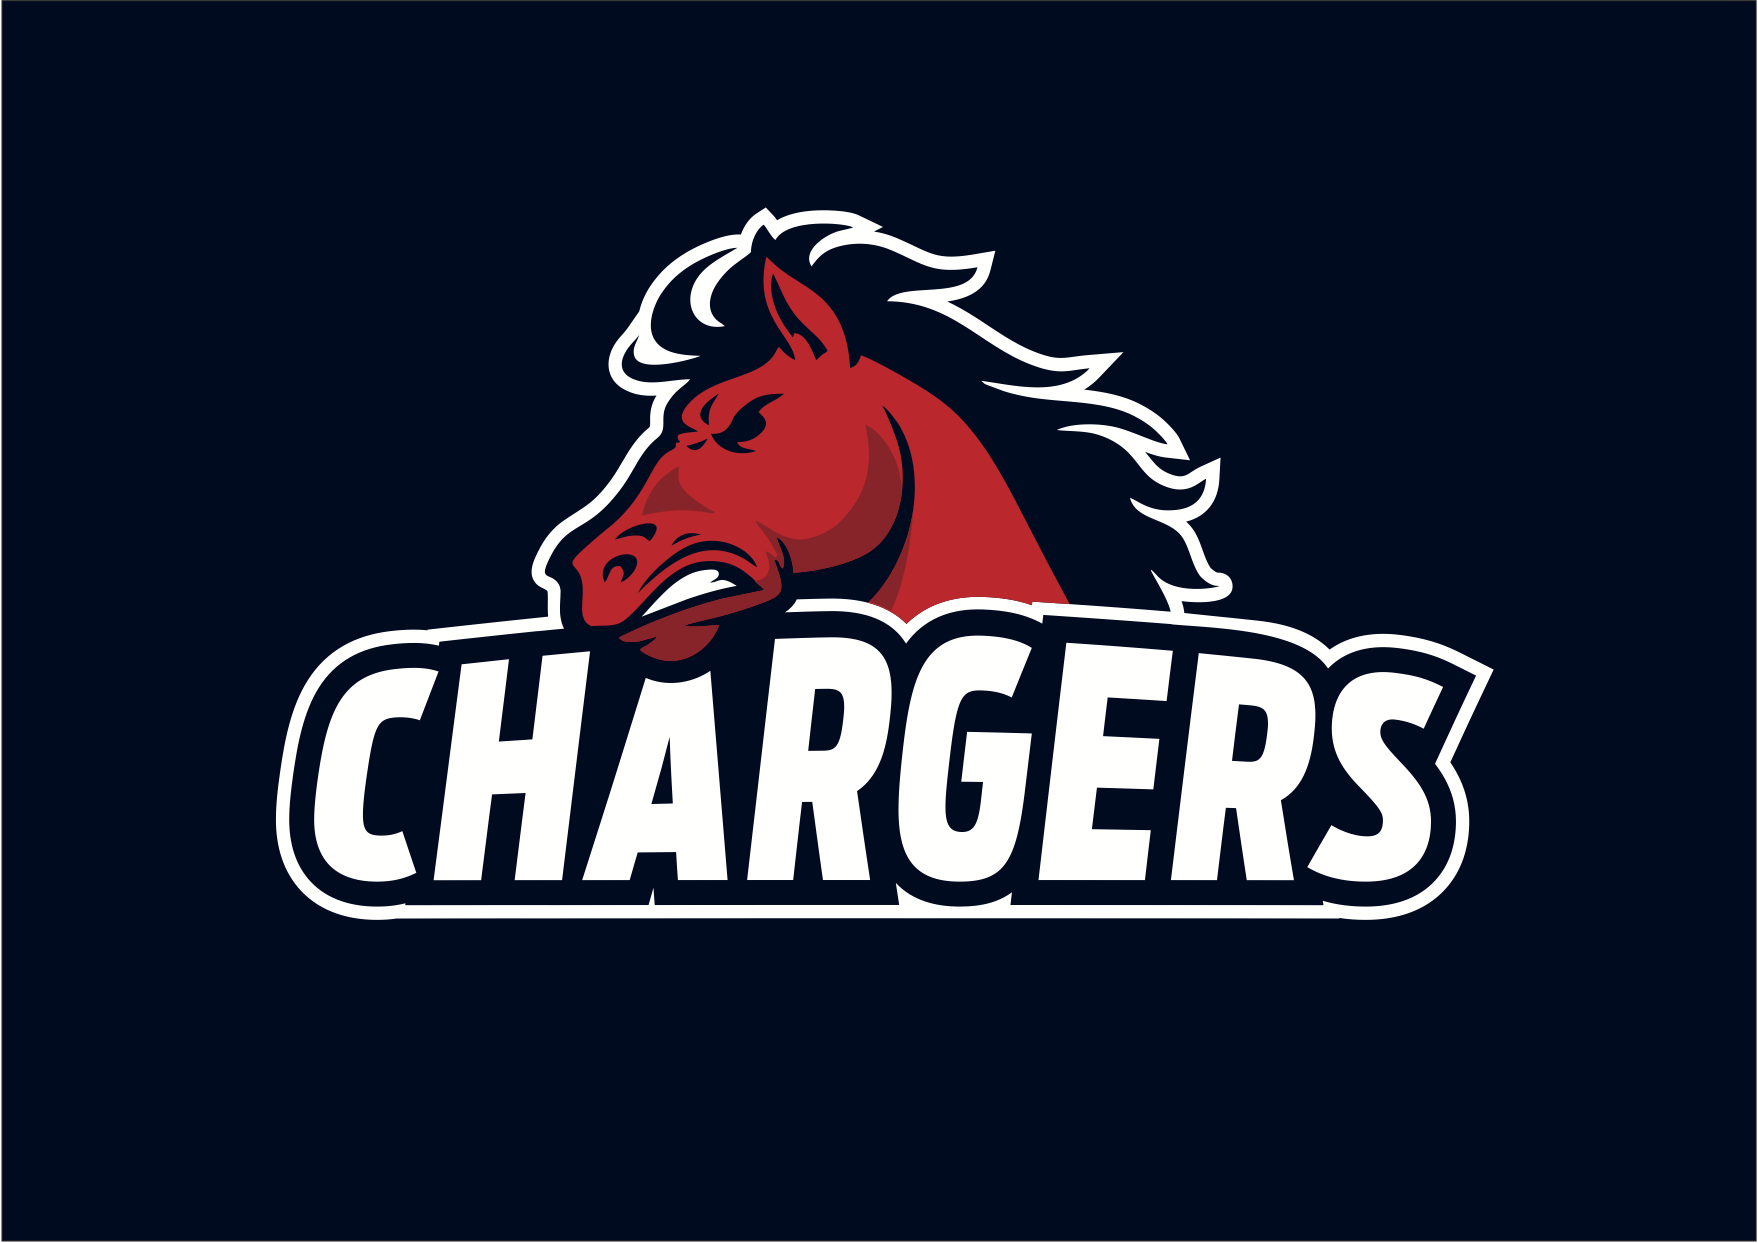 RE Chargers